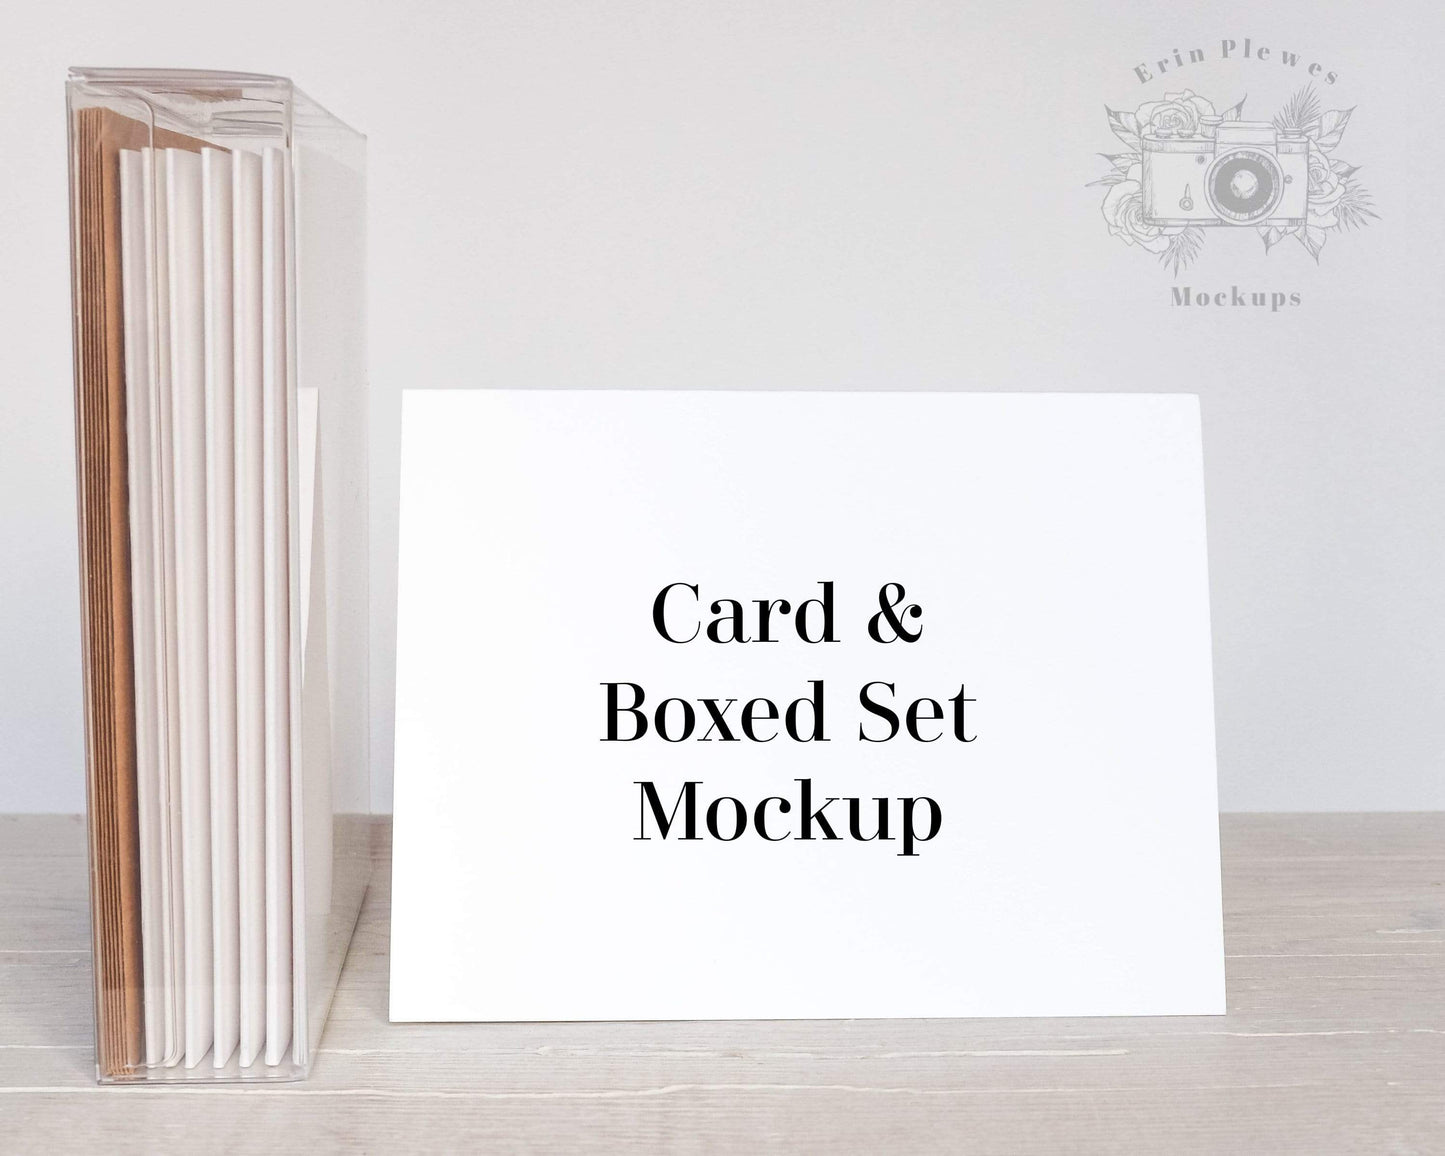 Erin Plewes Mockups Greeting Card Set Mockup, Invitation mockup for baby shower with boxed set of cards, Jpeg Instant Digital Download for stock photography